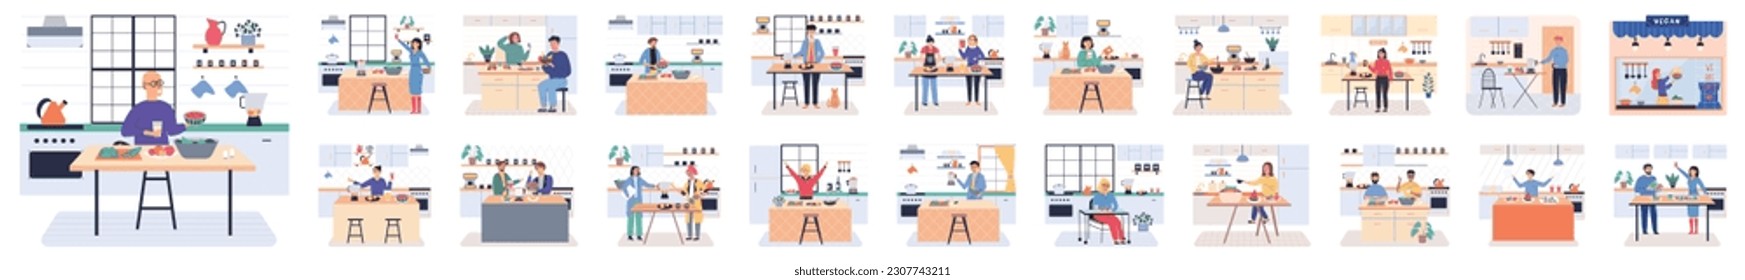 People cooking vegetarian food. Vector illustration. Vegetarian concept with healthy fresh diet a woman eating salad. Collection of people cooking in kitchen, serving table, dining together